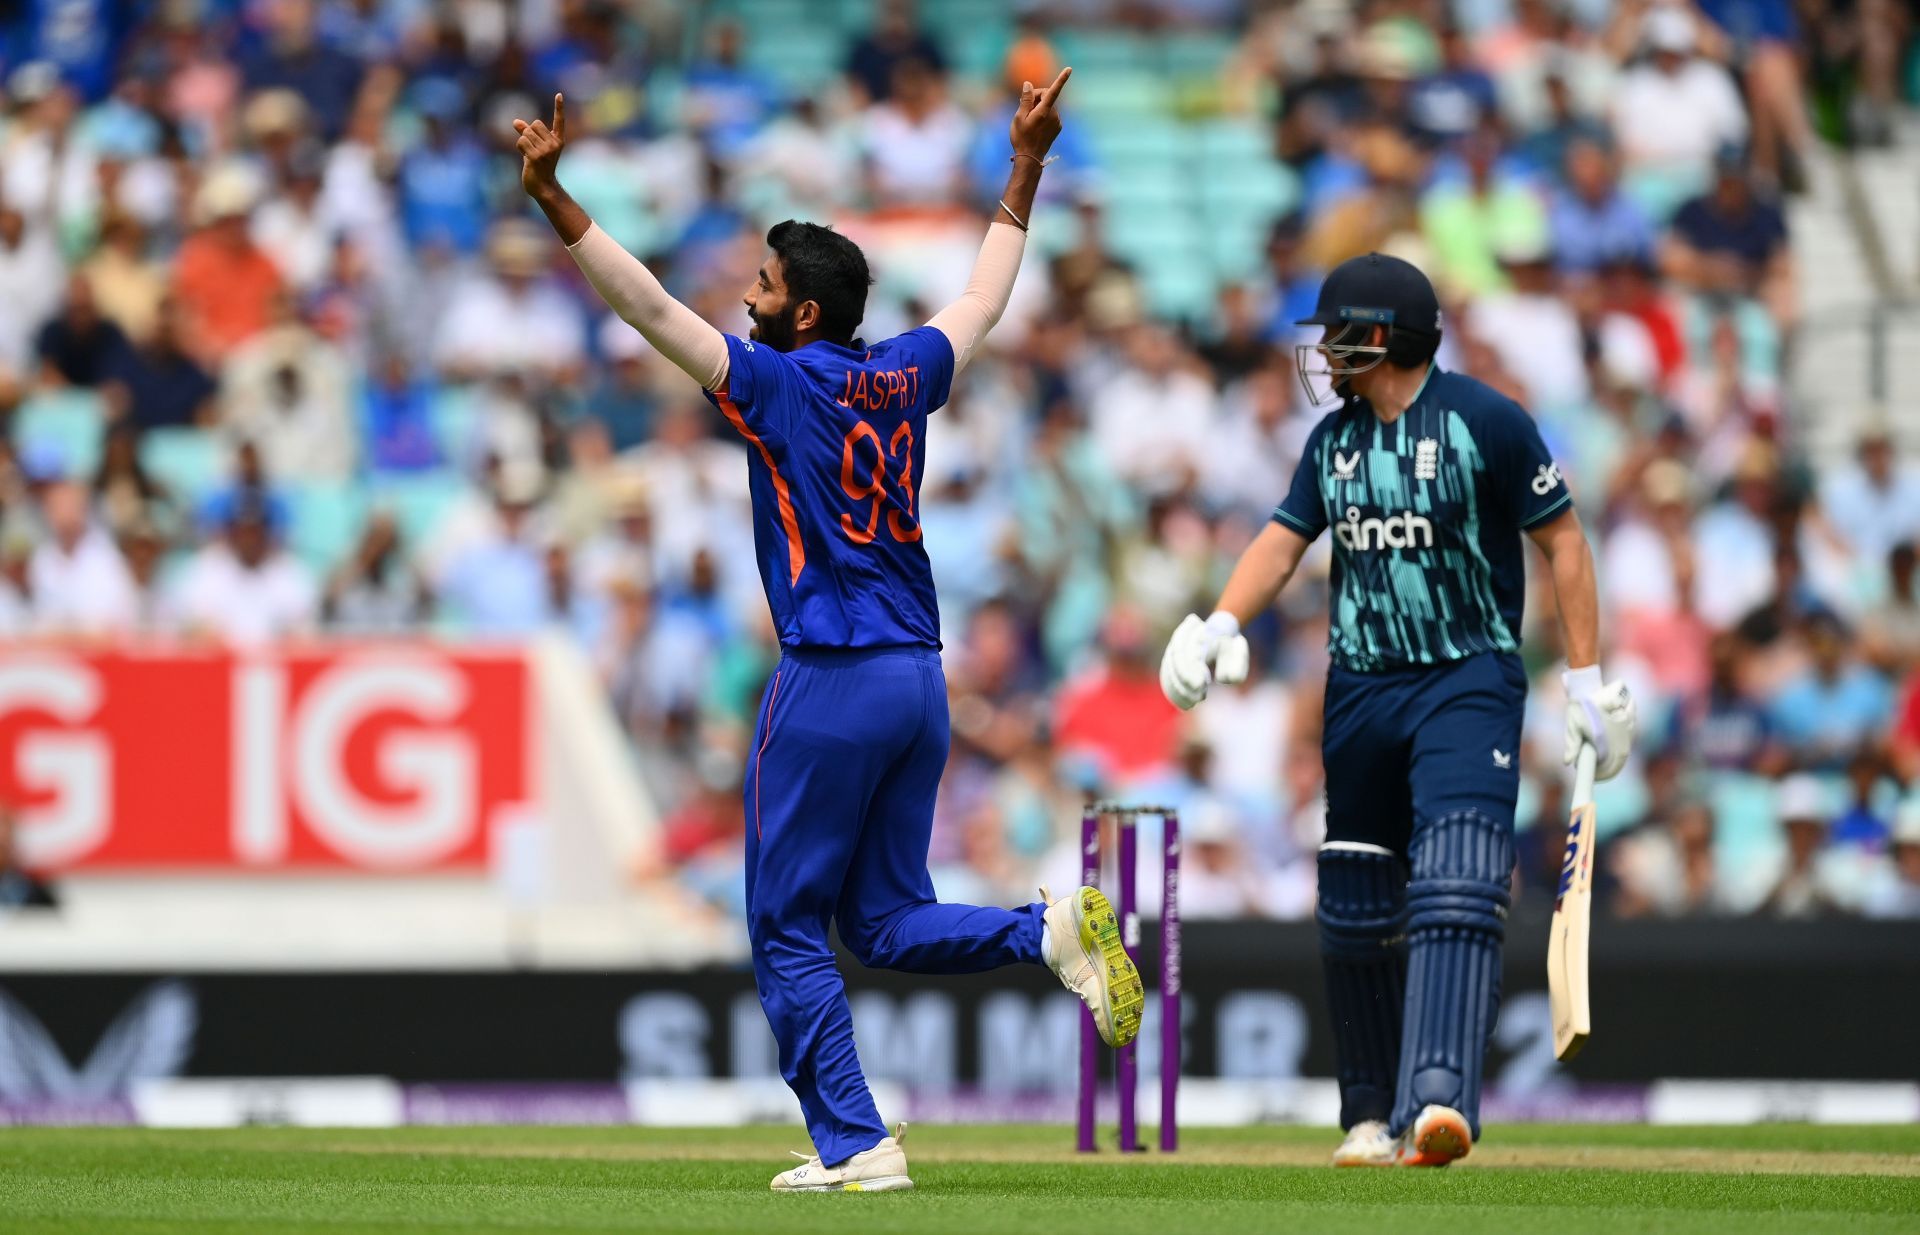 Jasprit Bumrah celebrates taking the wicket of Jonny Bairstow. Pic: Getty Images